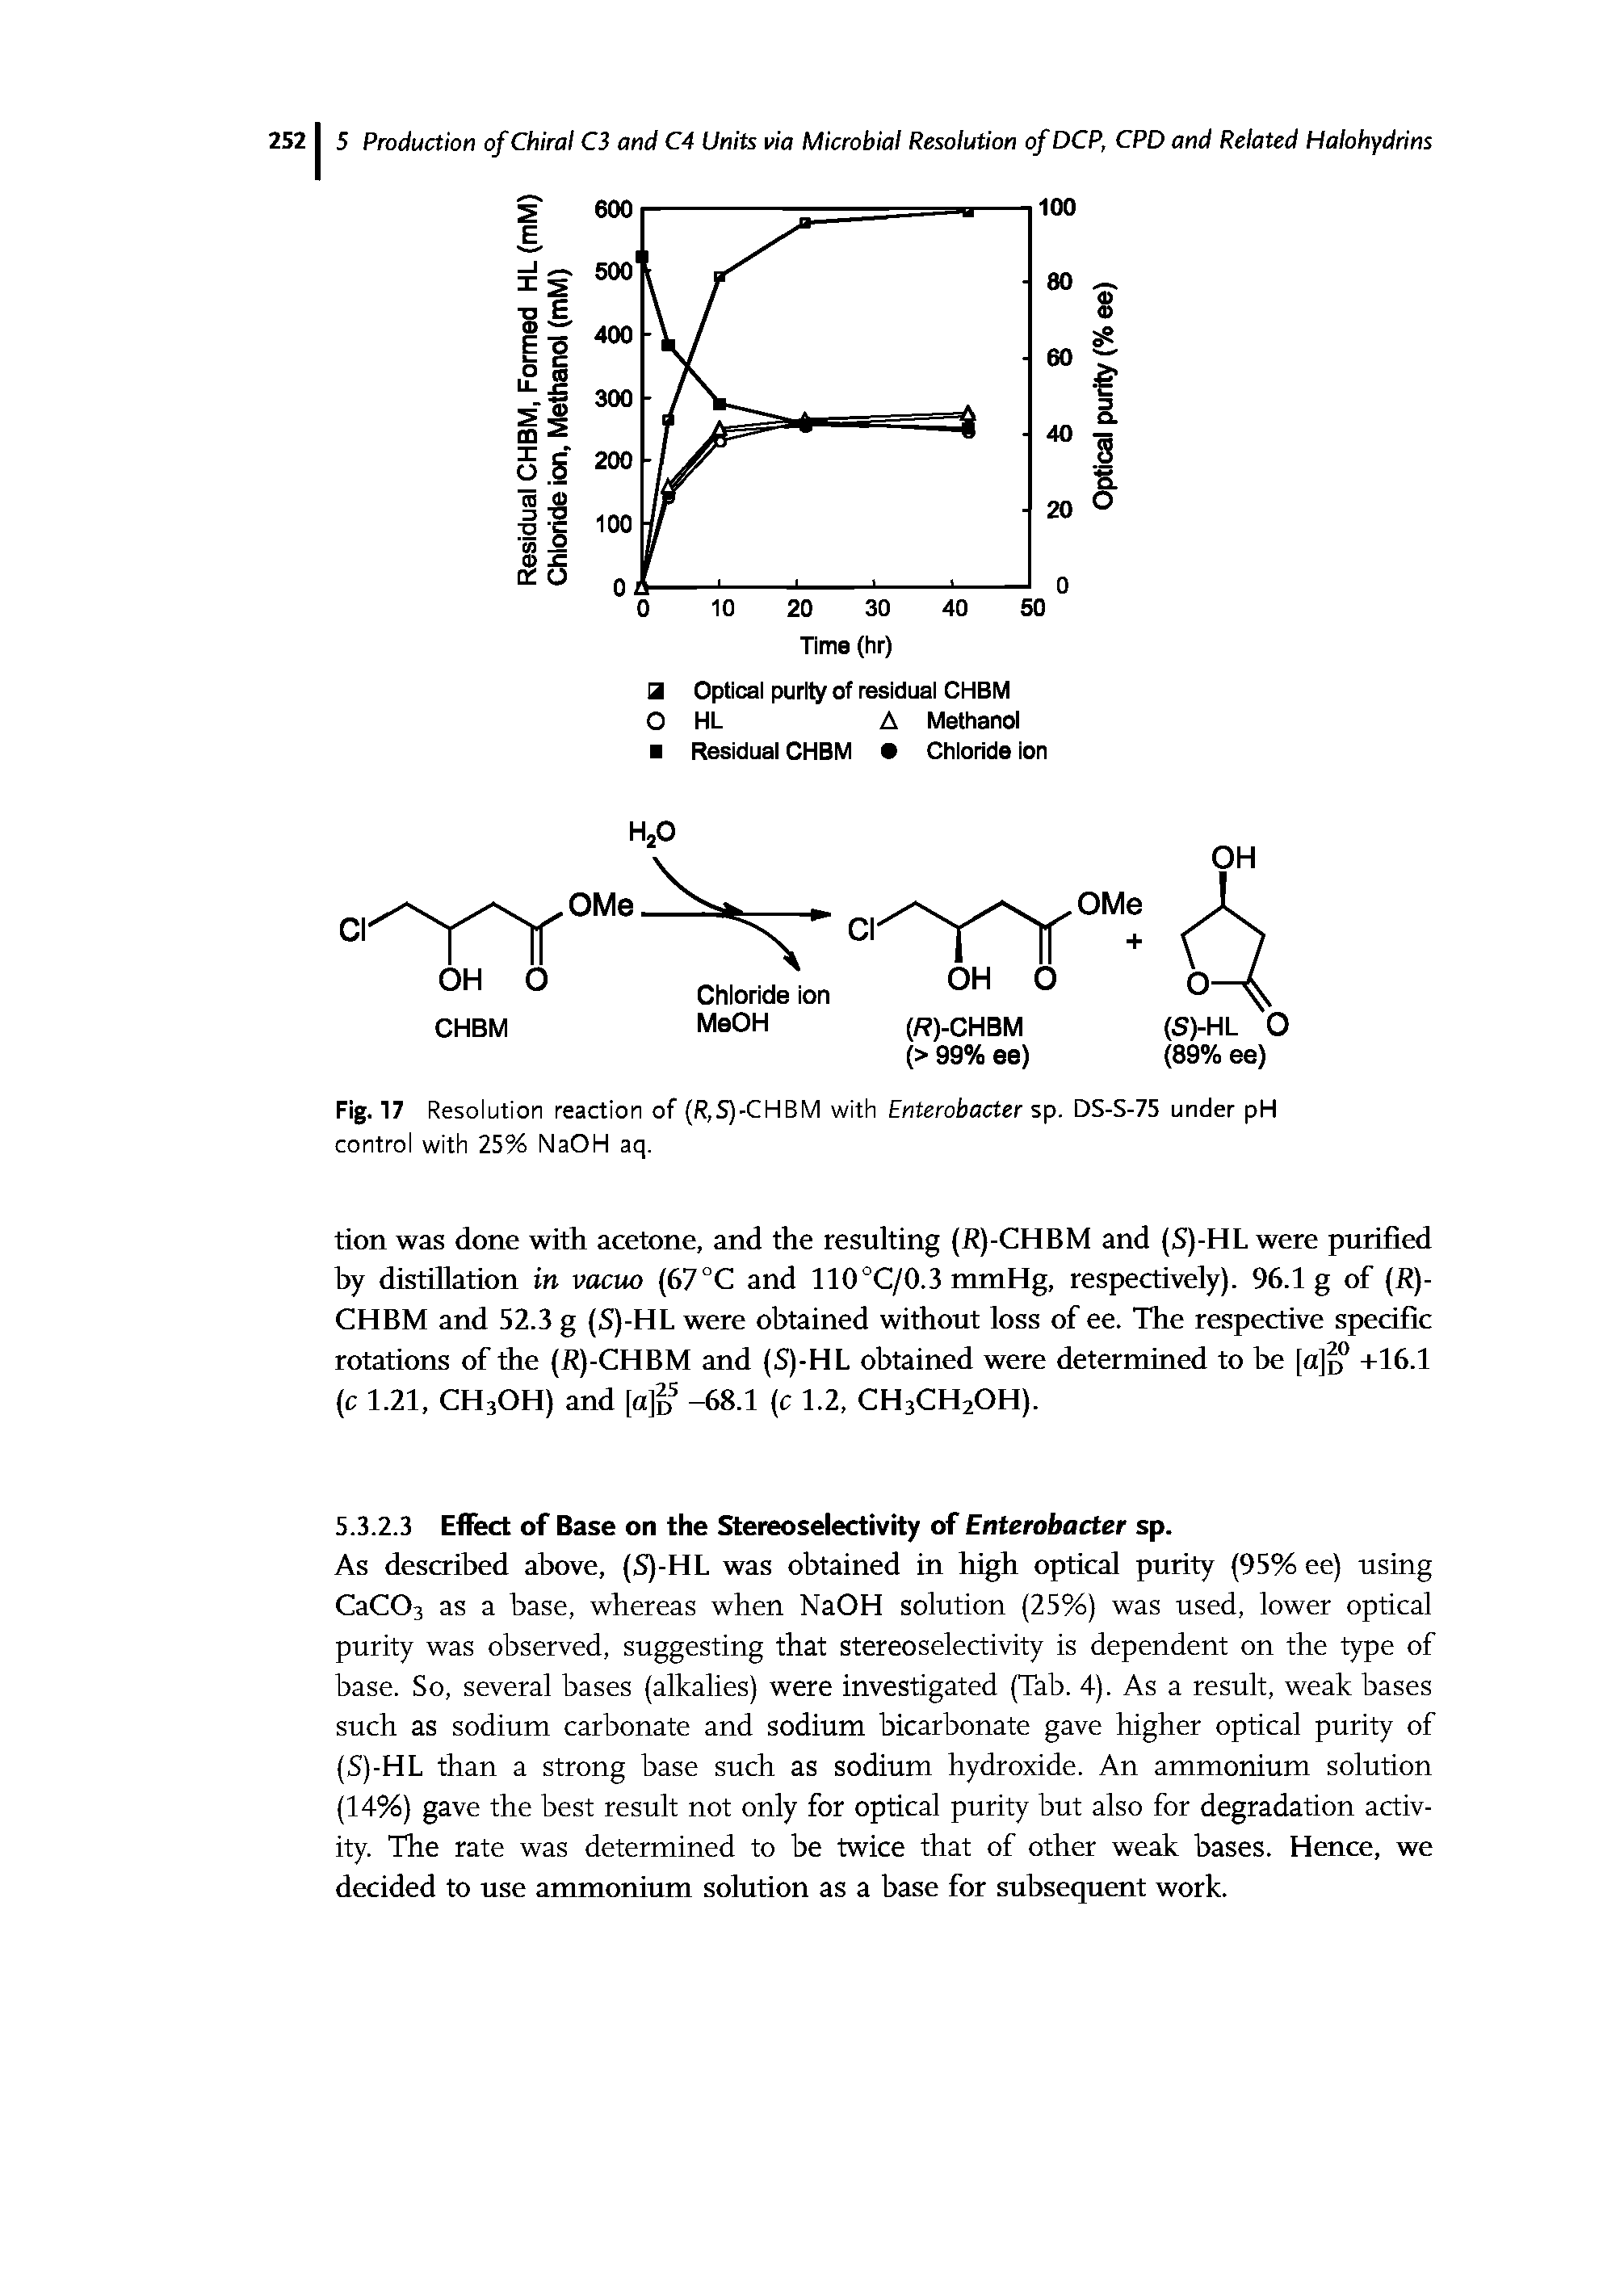 Fig. 17 Resolution reaction of (R,S)-CHBM with Enterobacter sp. DS-S-75 under pH control with 25% NaOH aq.